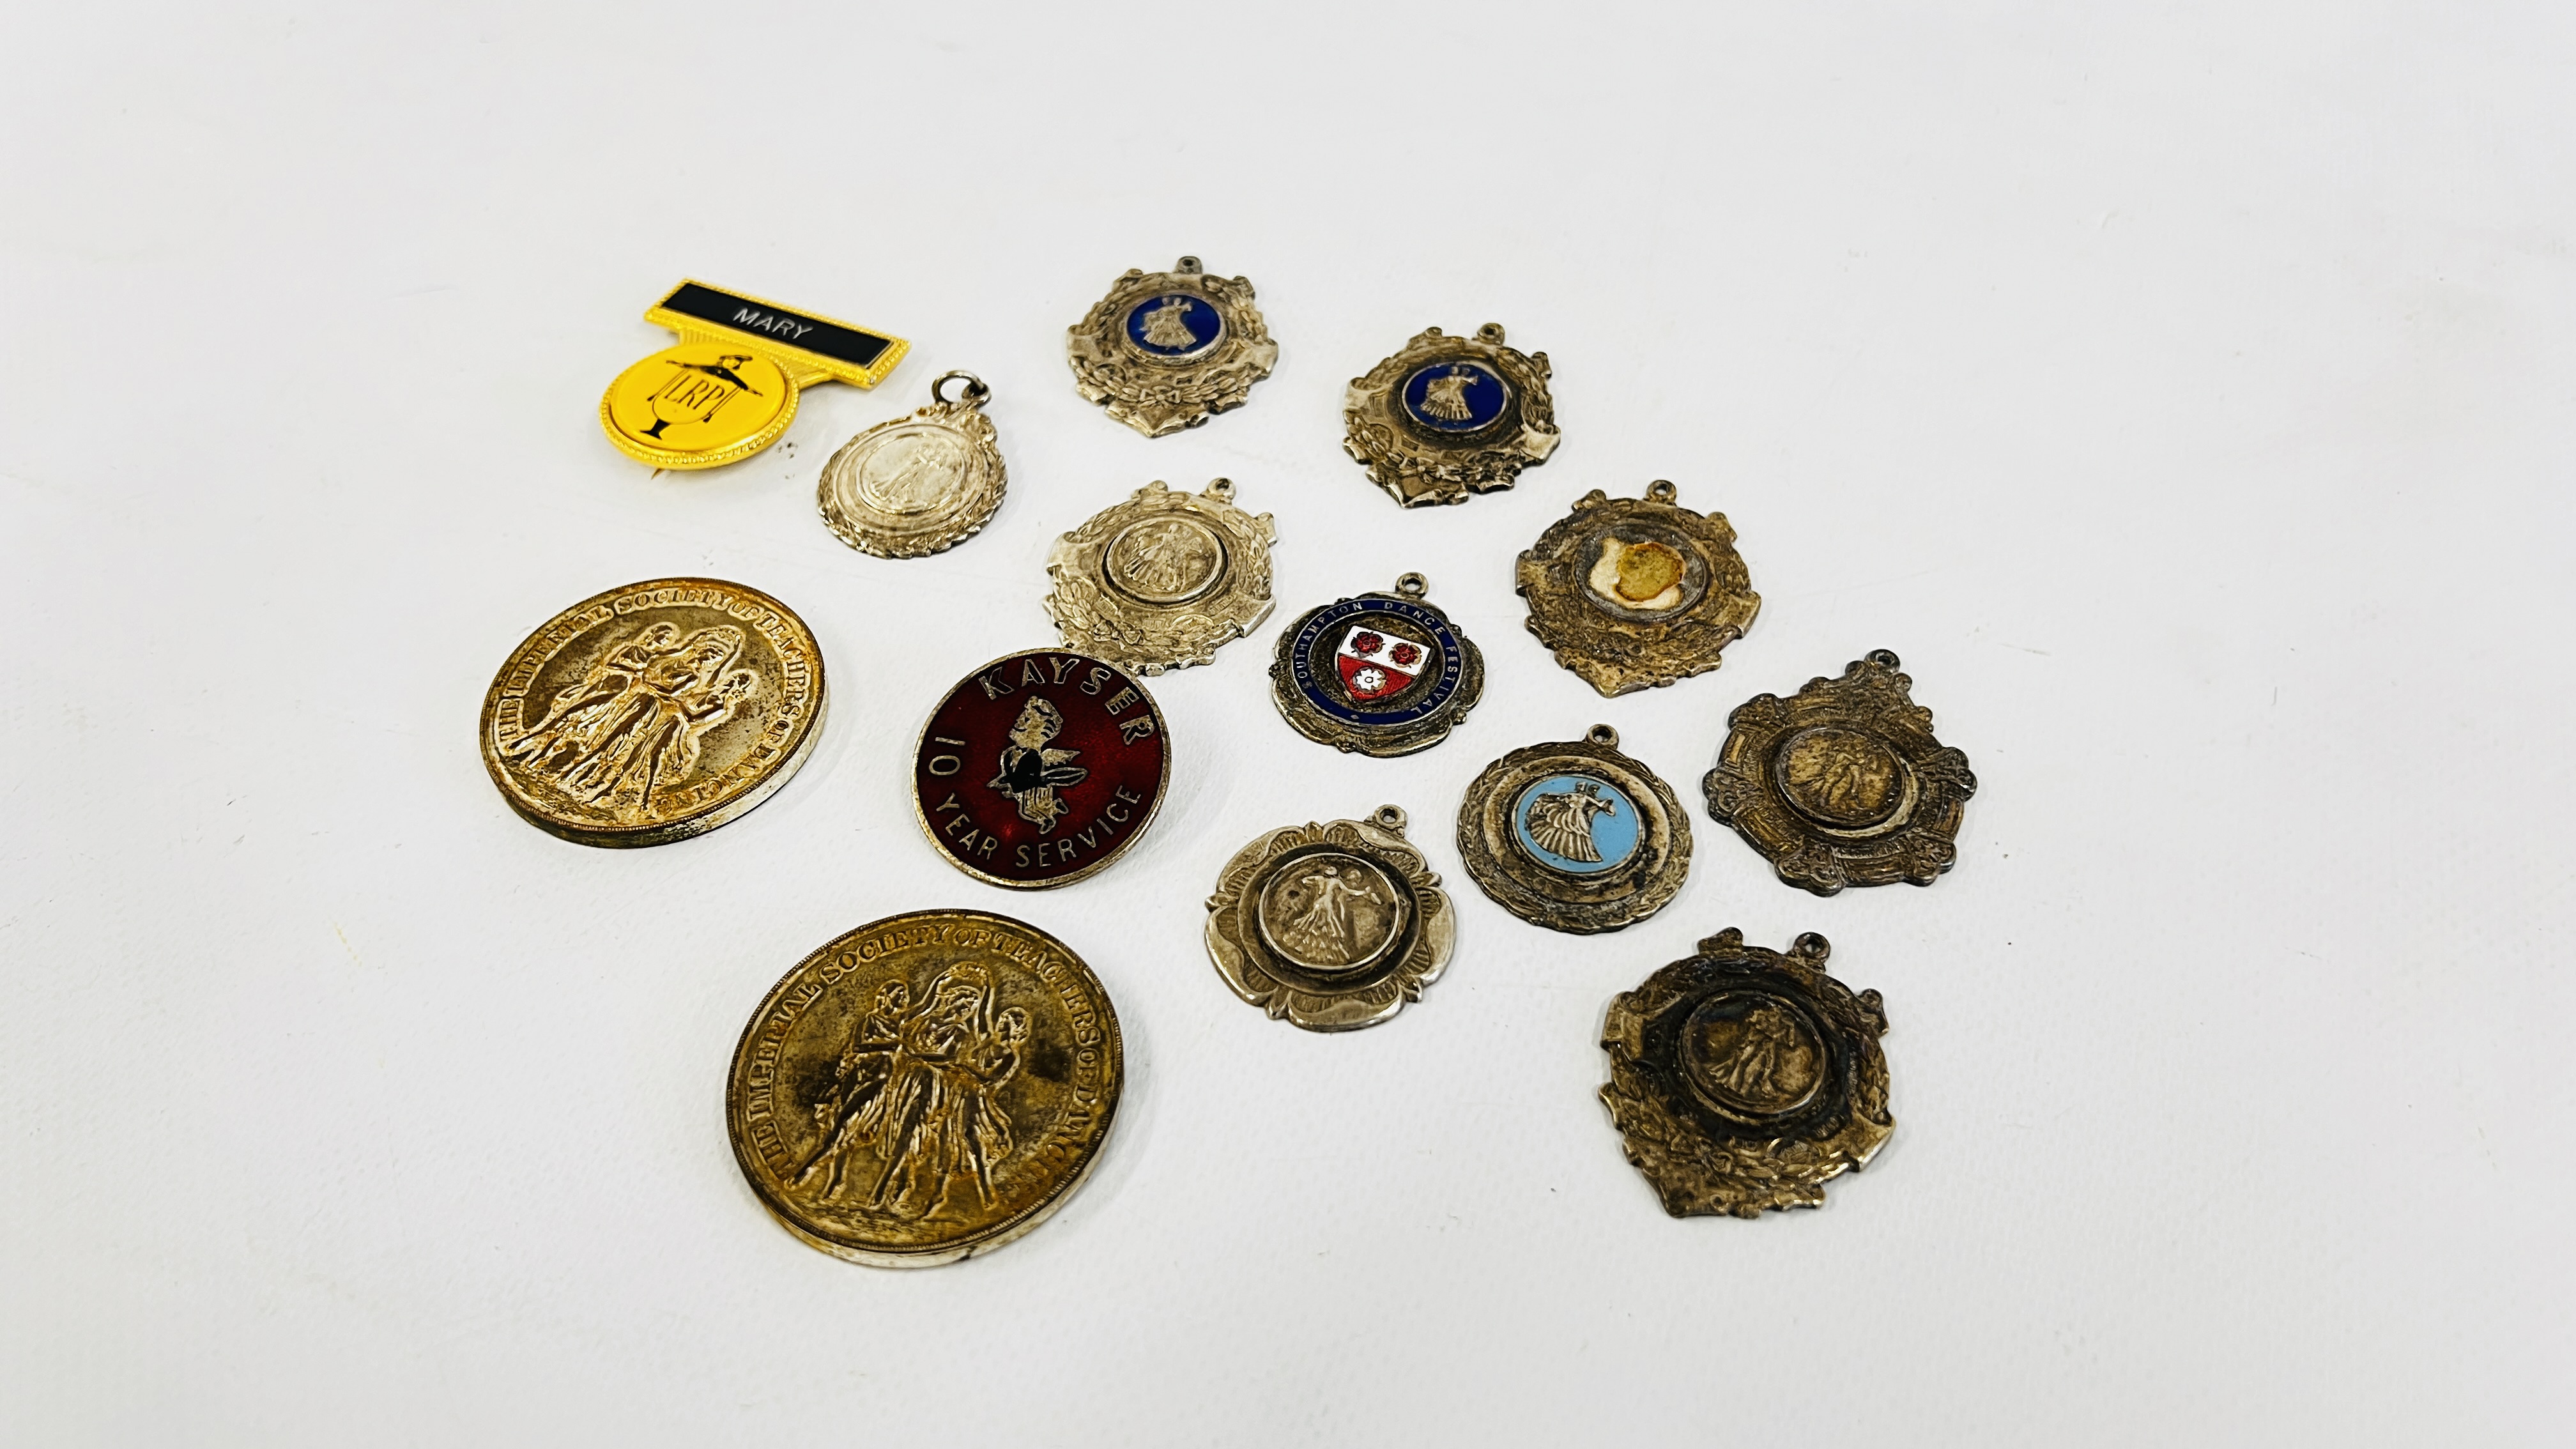 A GROUP OF VINTAGE MEDALS TO INCLUDE SILVER AND ENAMELLED EXAMPLES ALONG WITH AN ENAMELLED EXAMPLE